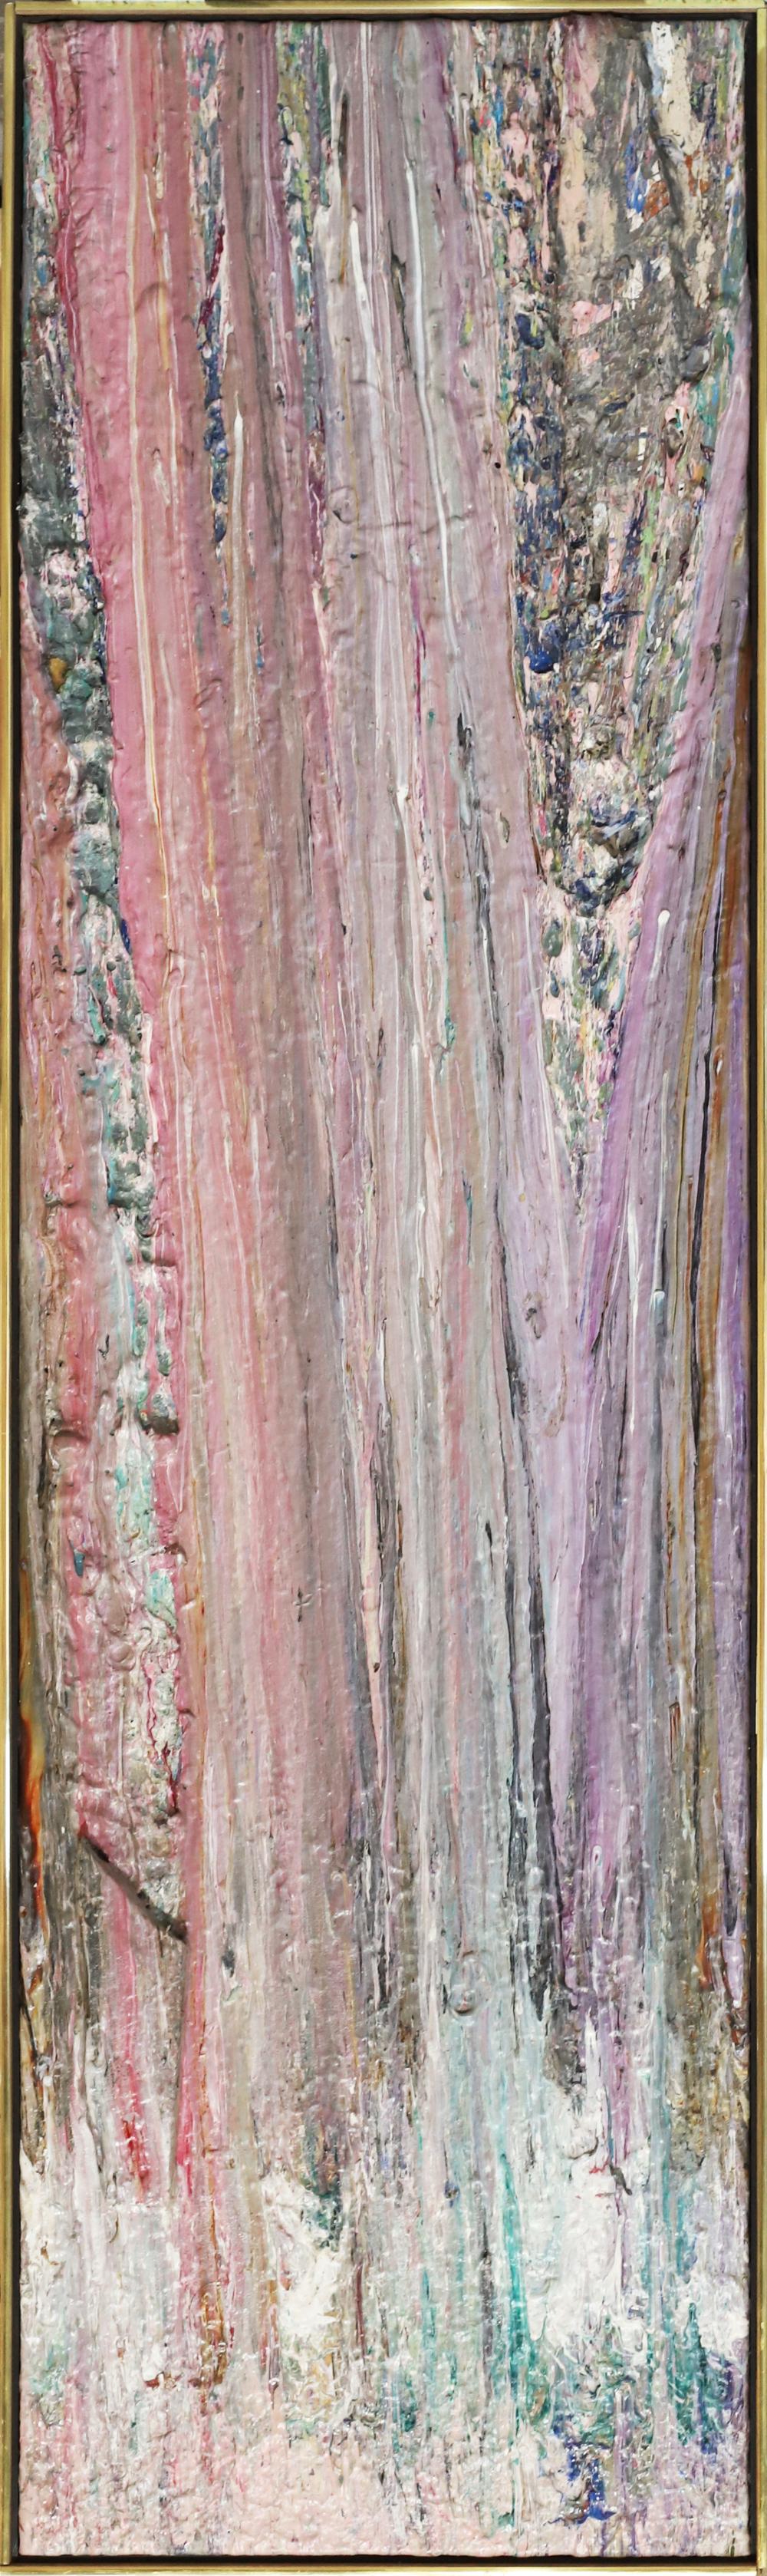 81G-5 - Painting by Larry Poons